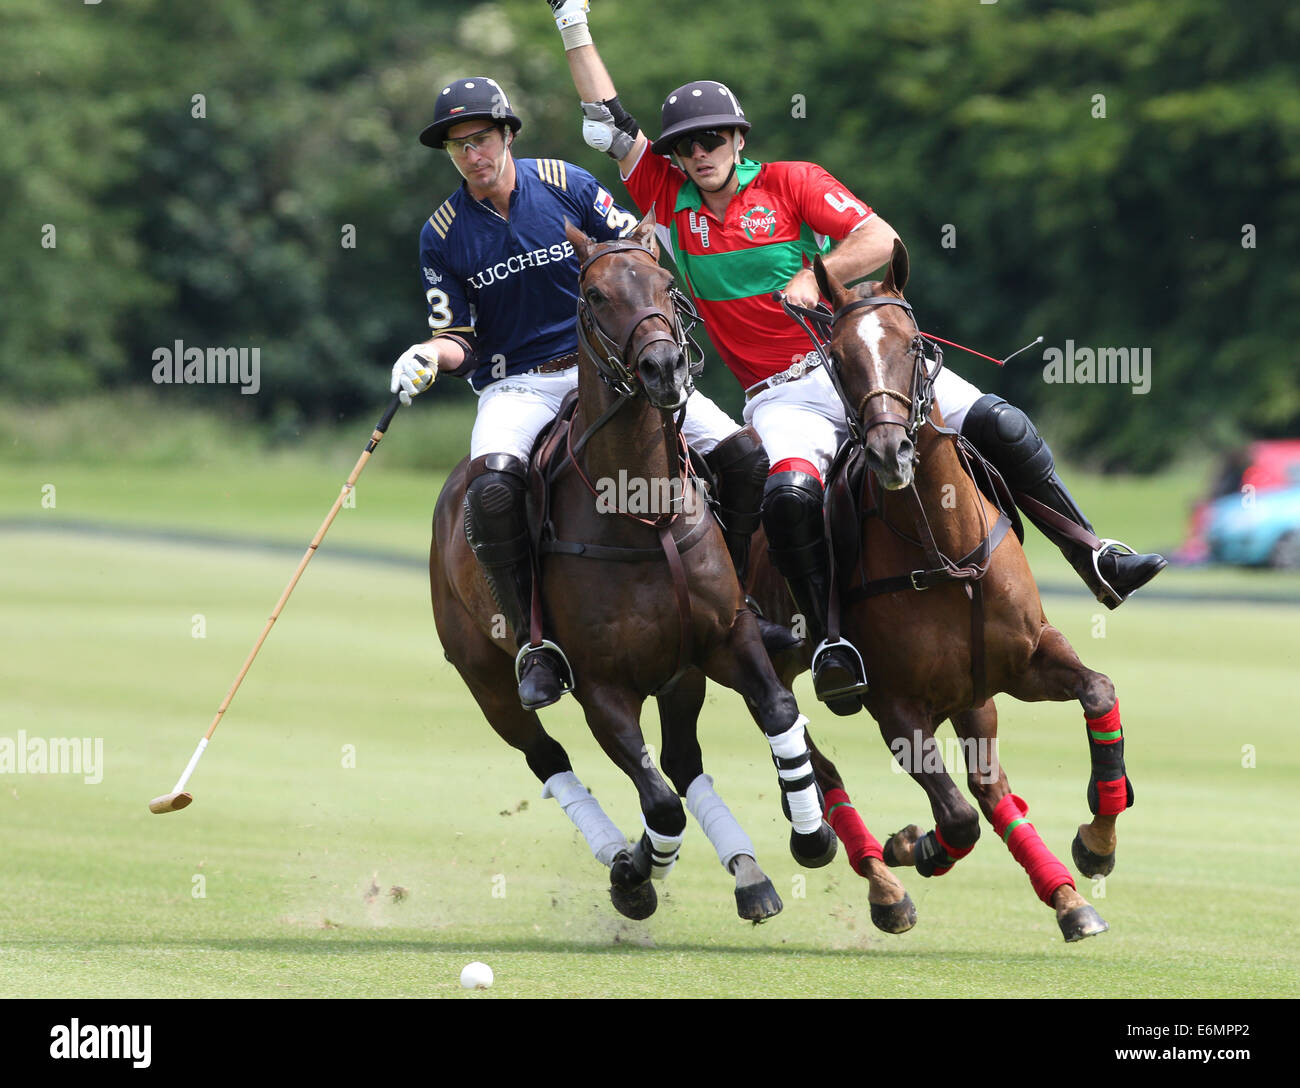 Facundo Sola (R) plays for Sumaya and Javier Novillo Astrada for Lucchese polo teams in the 2013 Veuve Clicquot Polo Gold cup Stock Photo